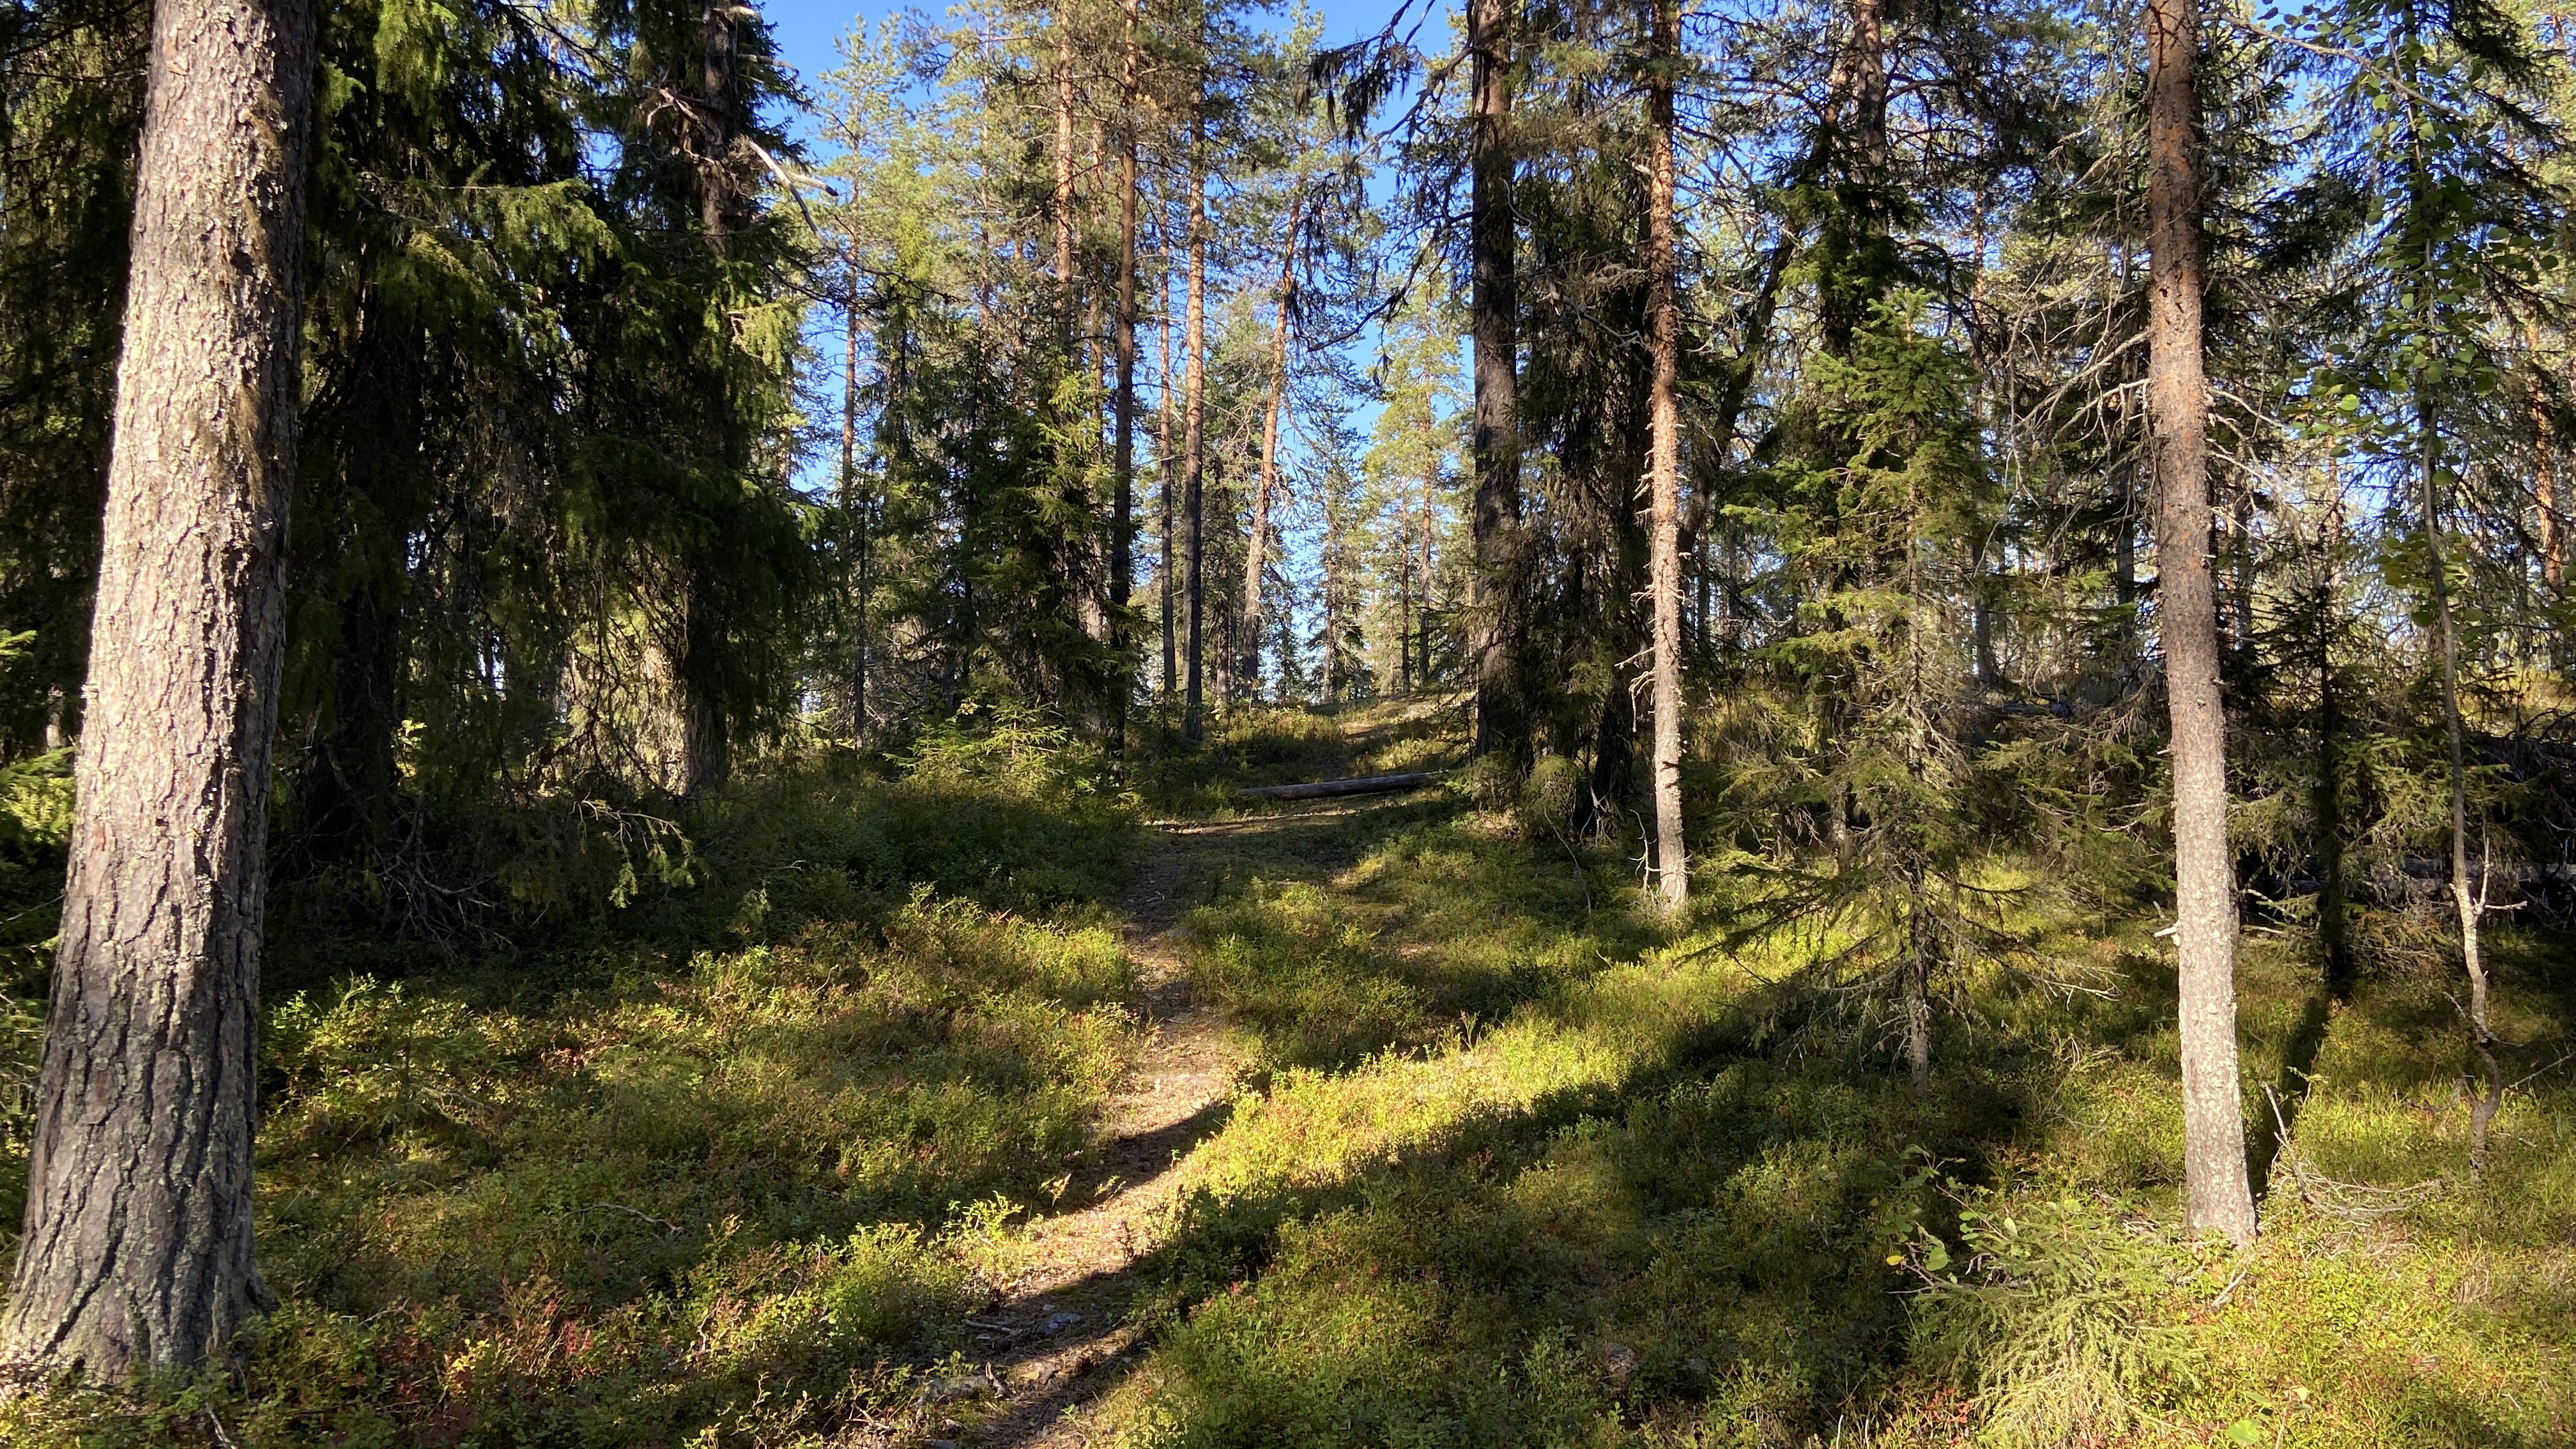 There are some paths at Alterberget.